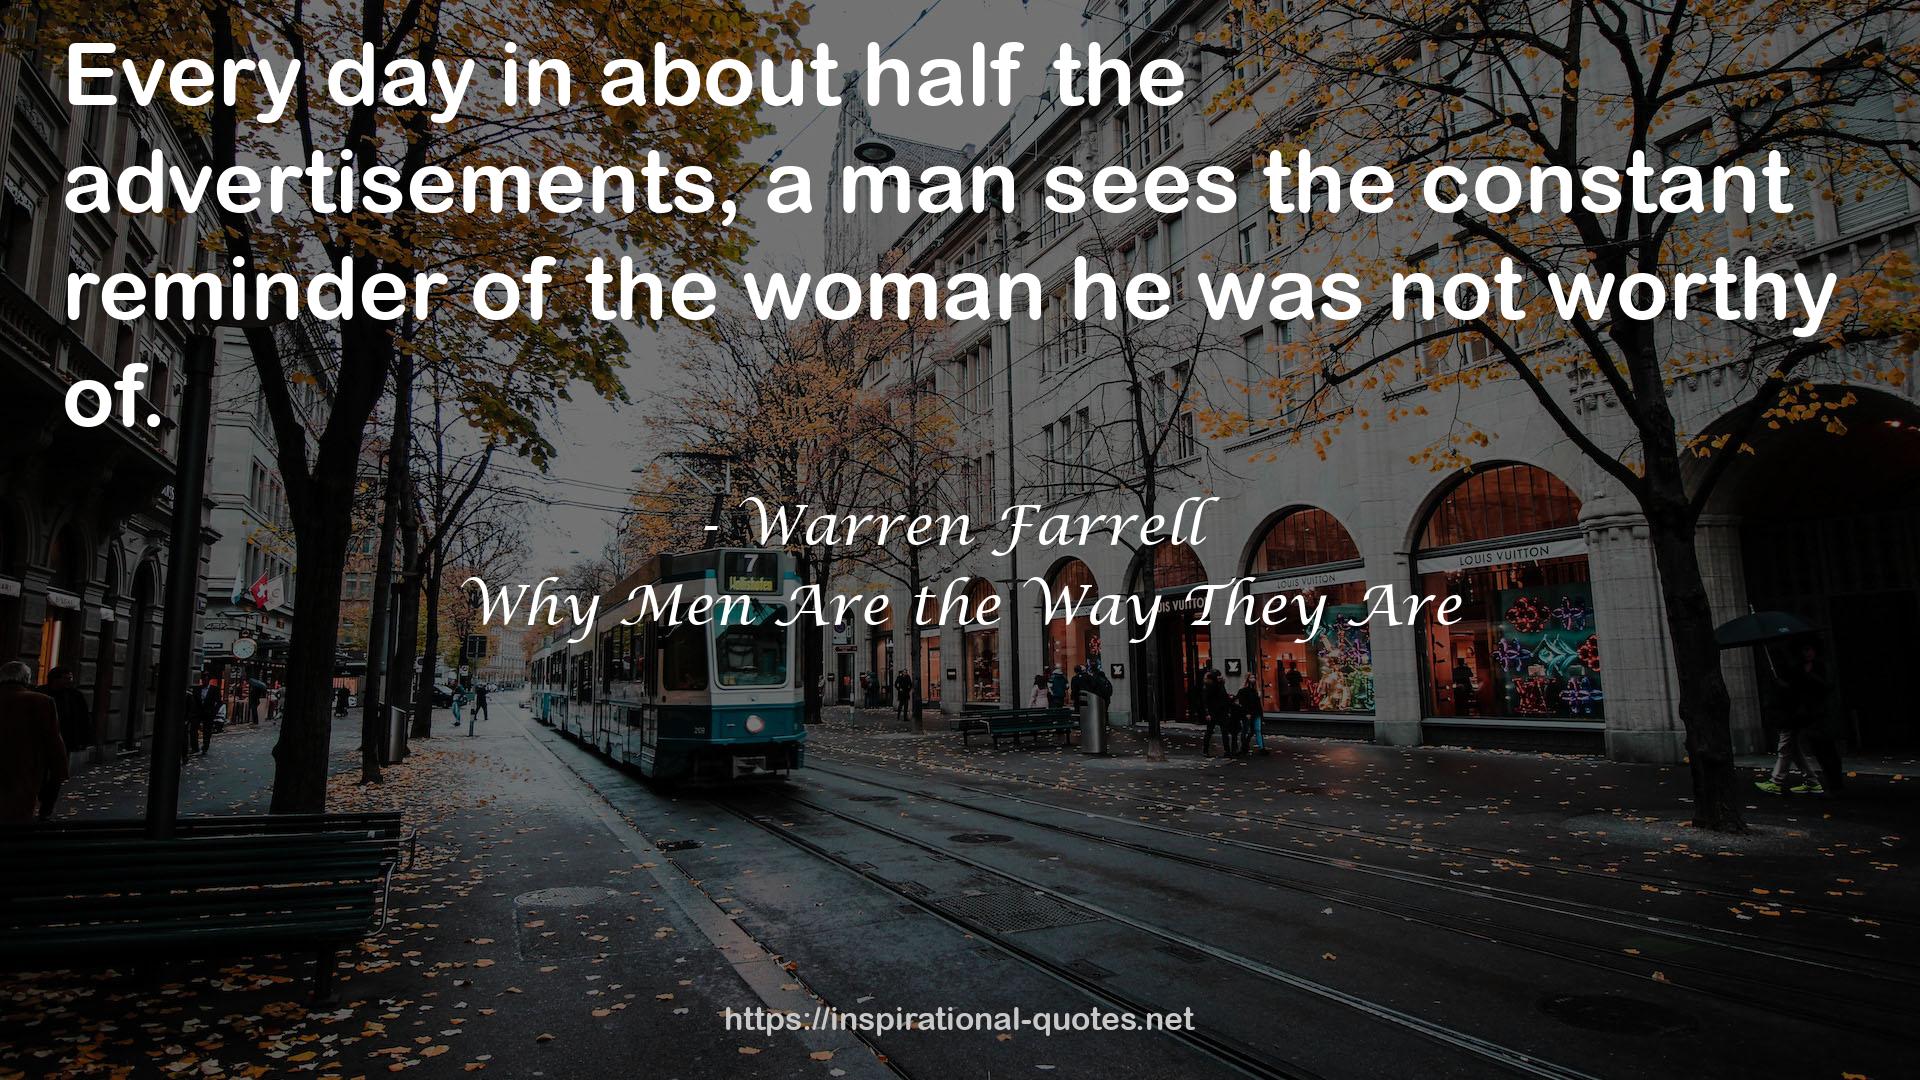 Why Men Are the Way They Are QUOTES